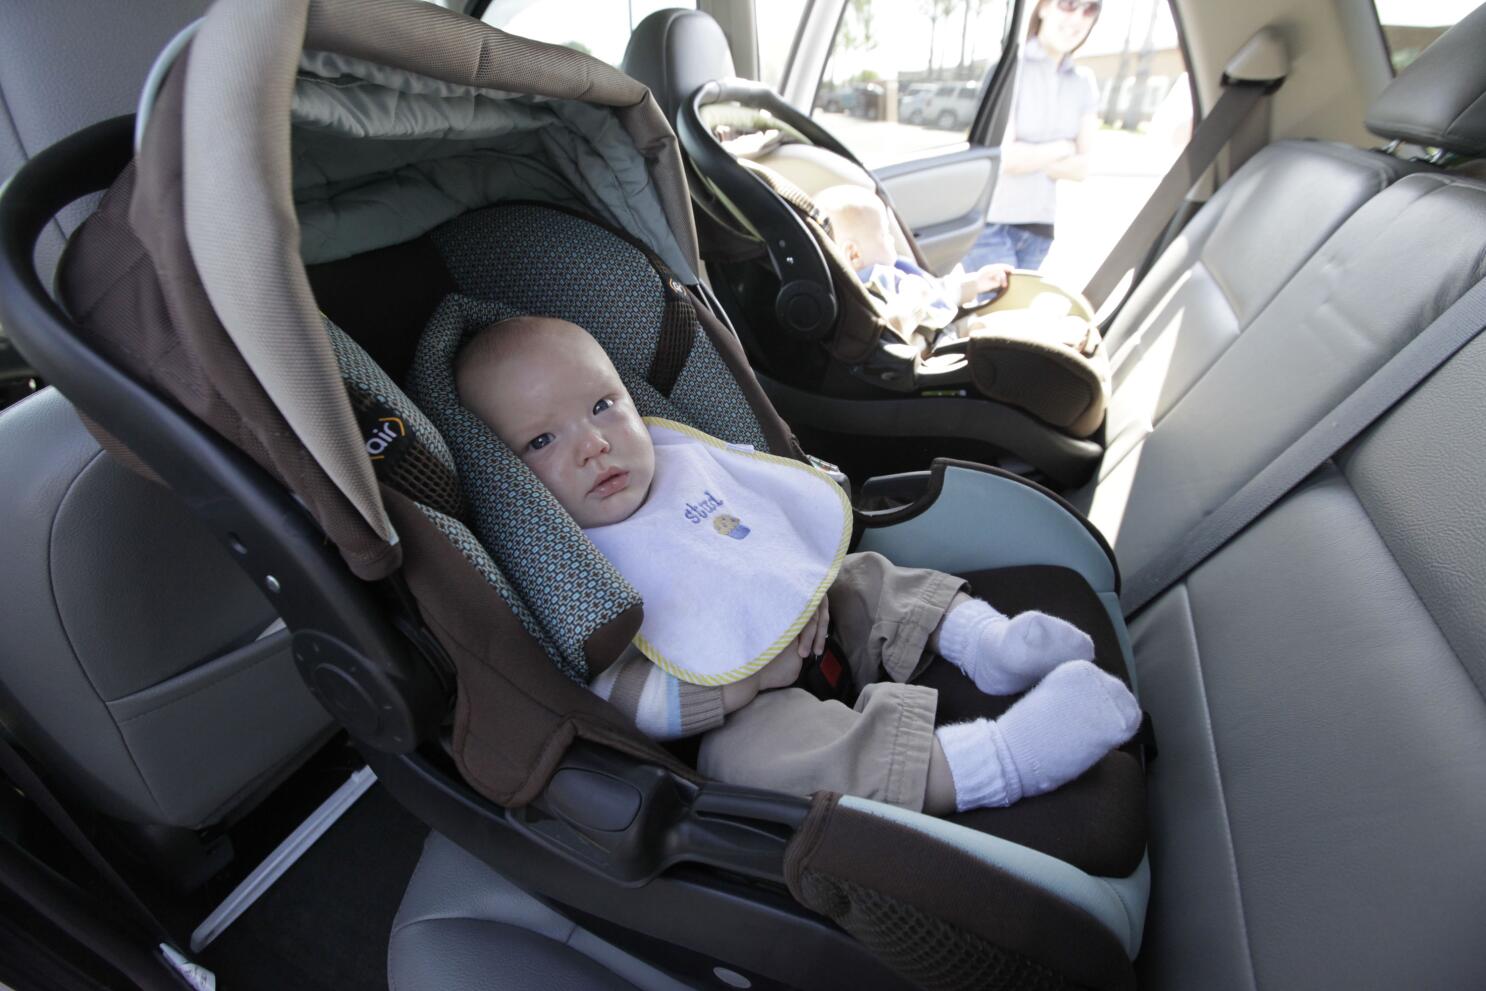 10 Tips For Bringing Your Car Seat on an Airplane » Safe in the Seat